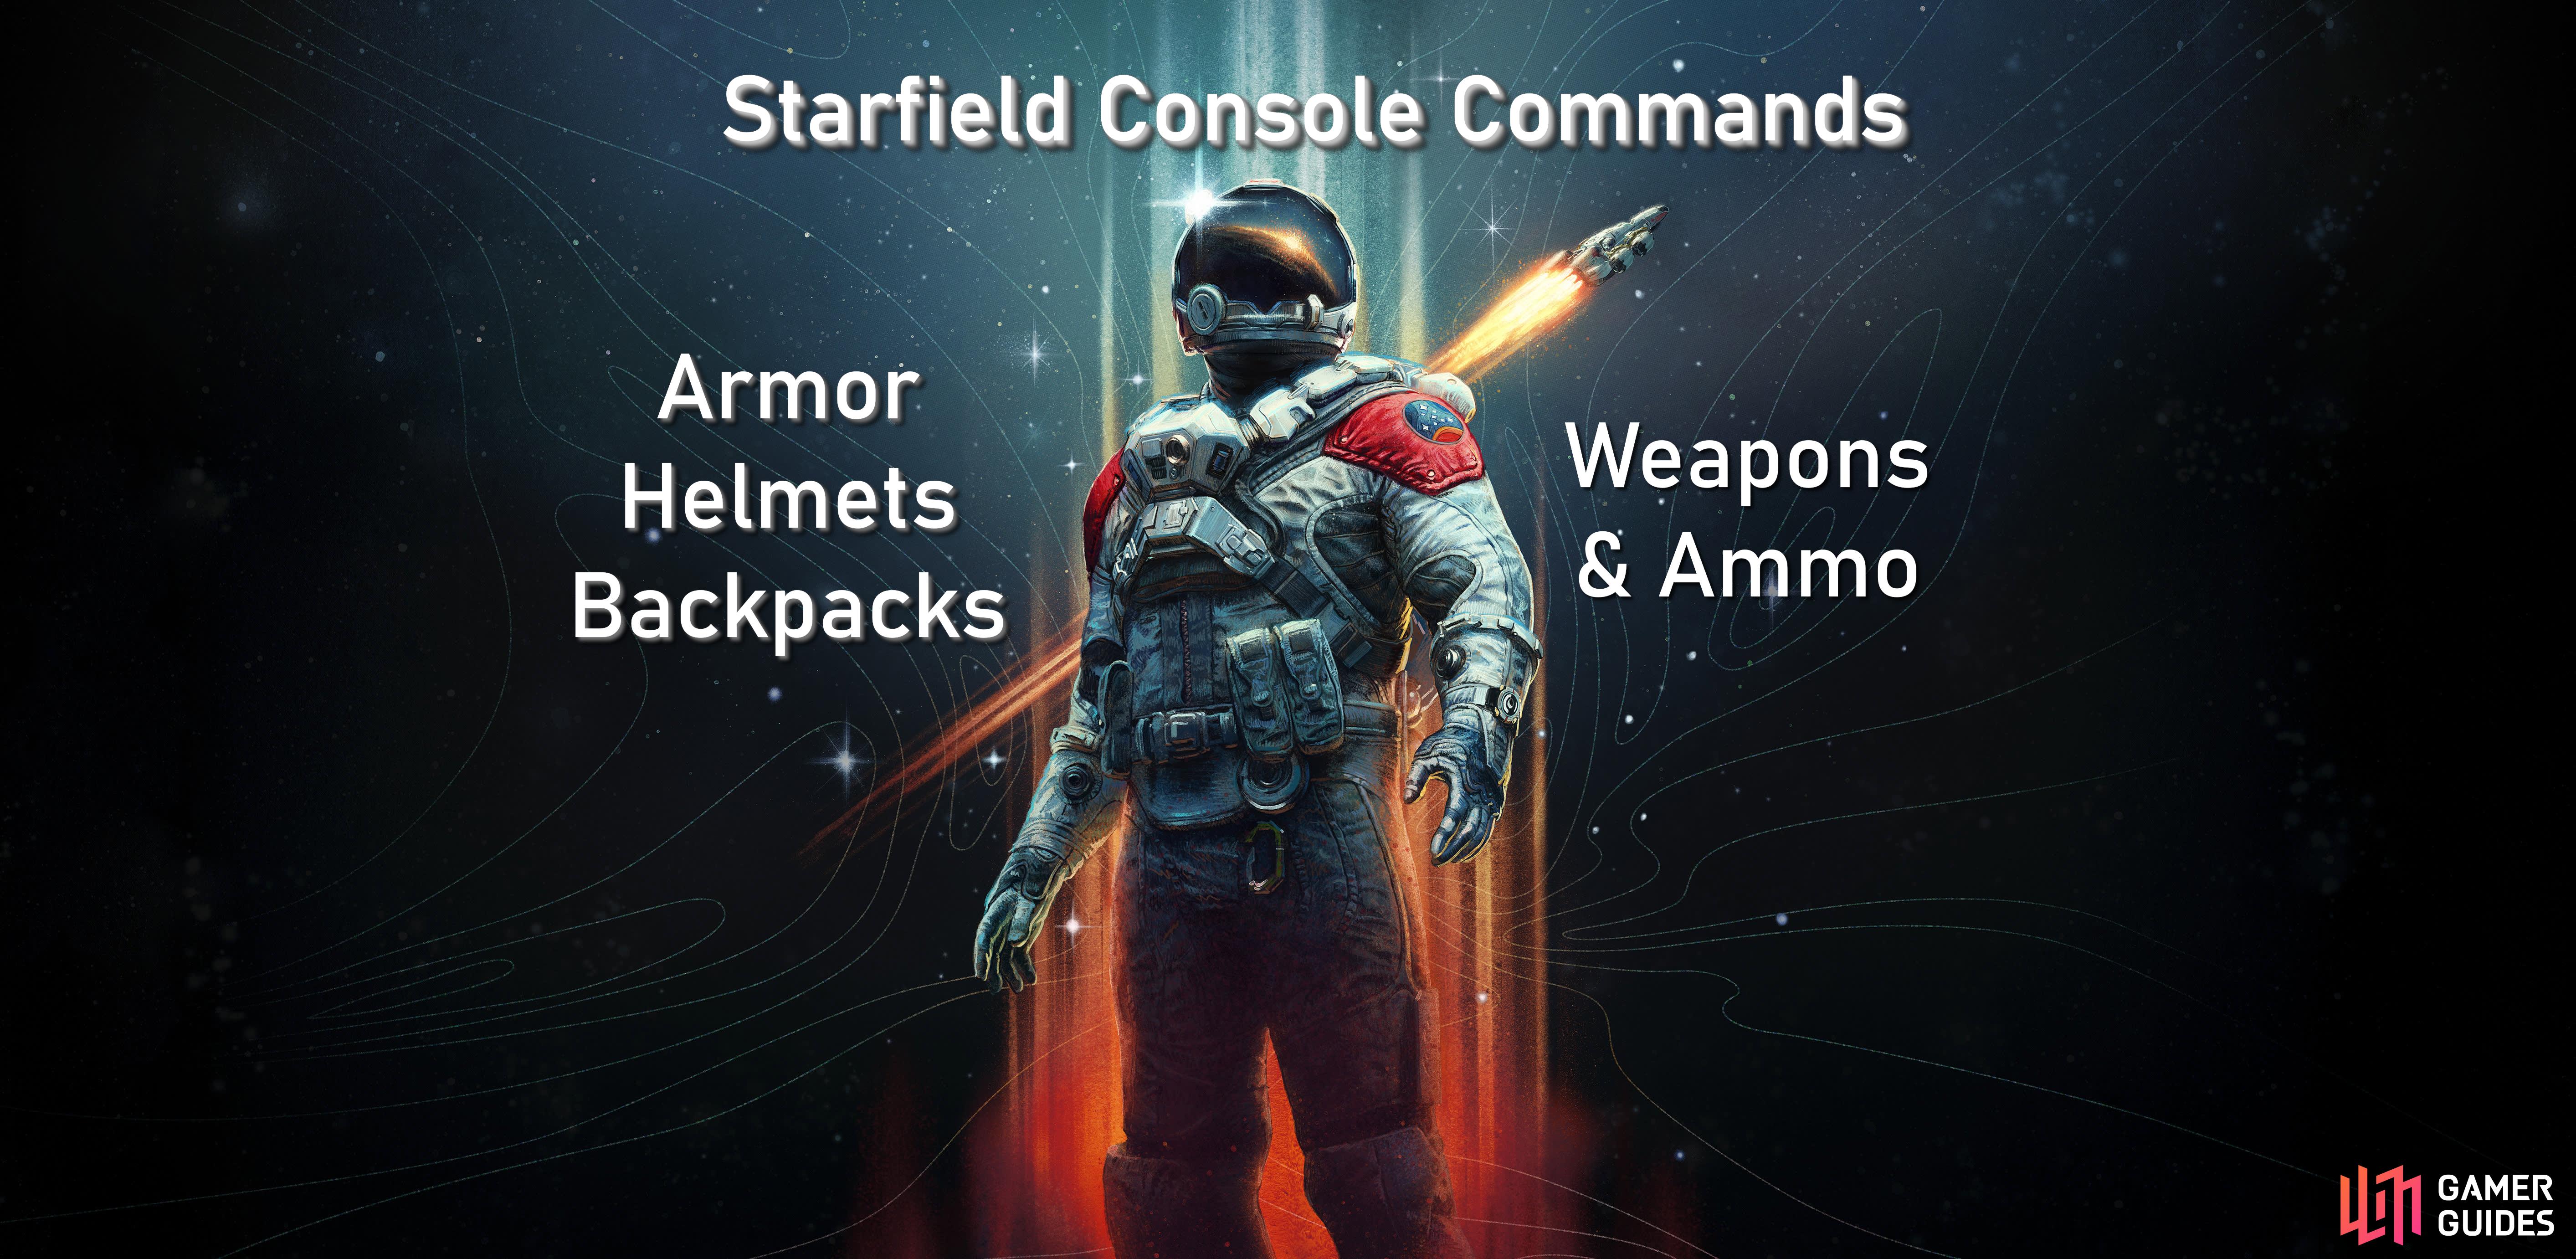 Console Commands and Item IDs for Armor, Helmets, Backpacks, Weapons, and Ammo in Starfield.